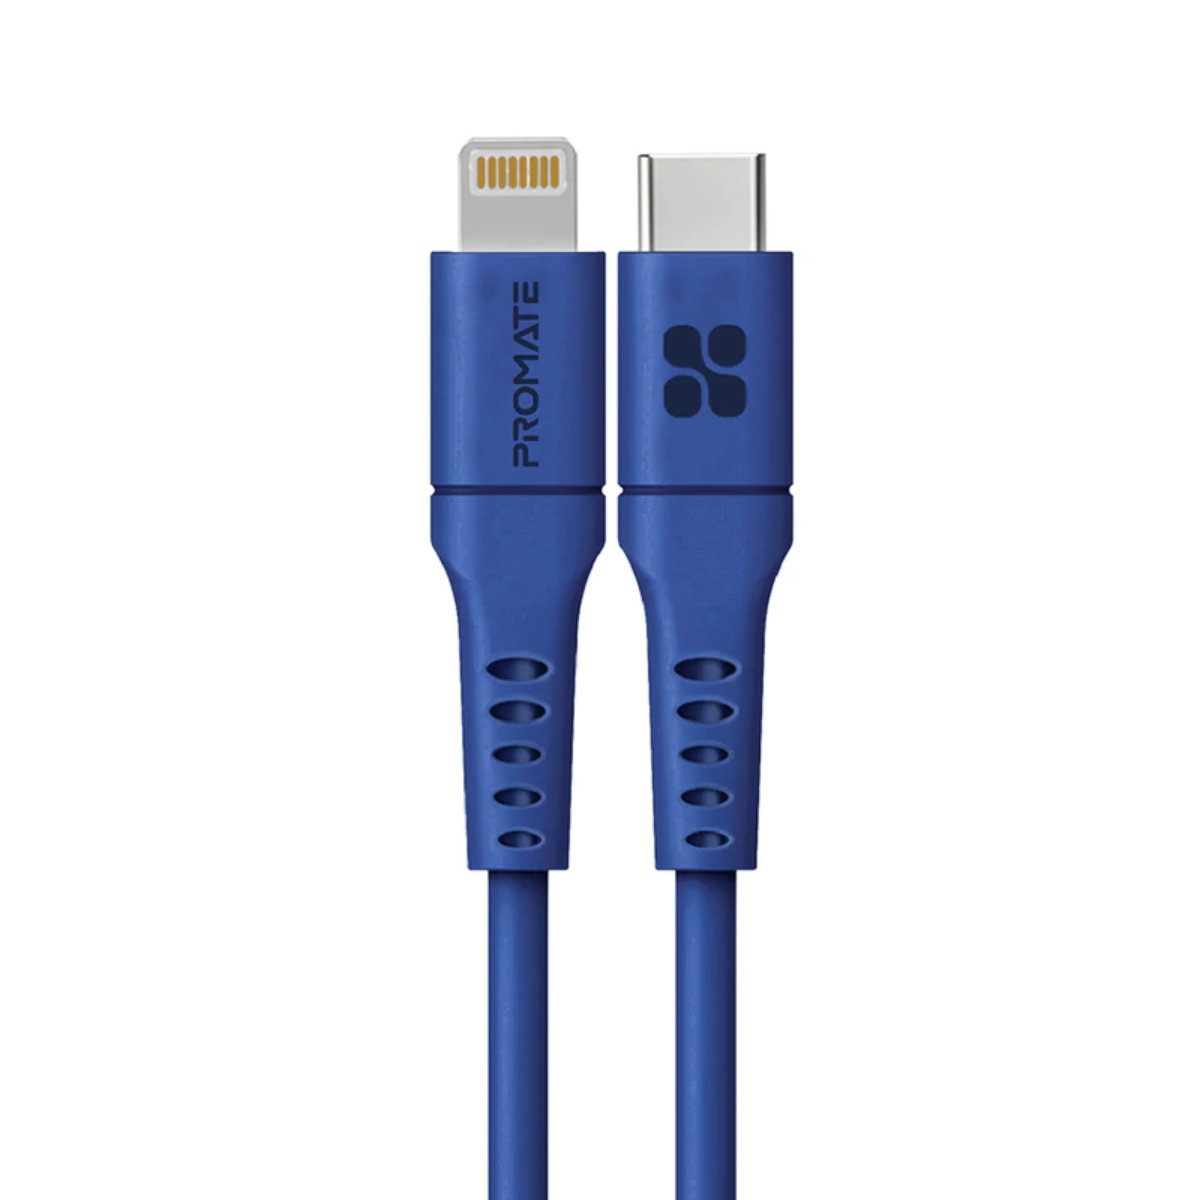 promate PowerLink-300 ( 20W Power Delivery Fast Charging Lightning Cable ) blue